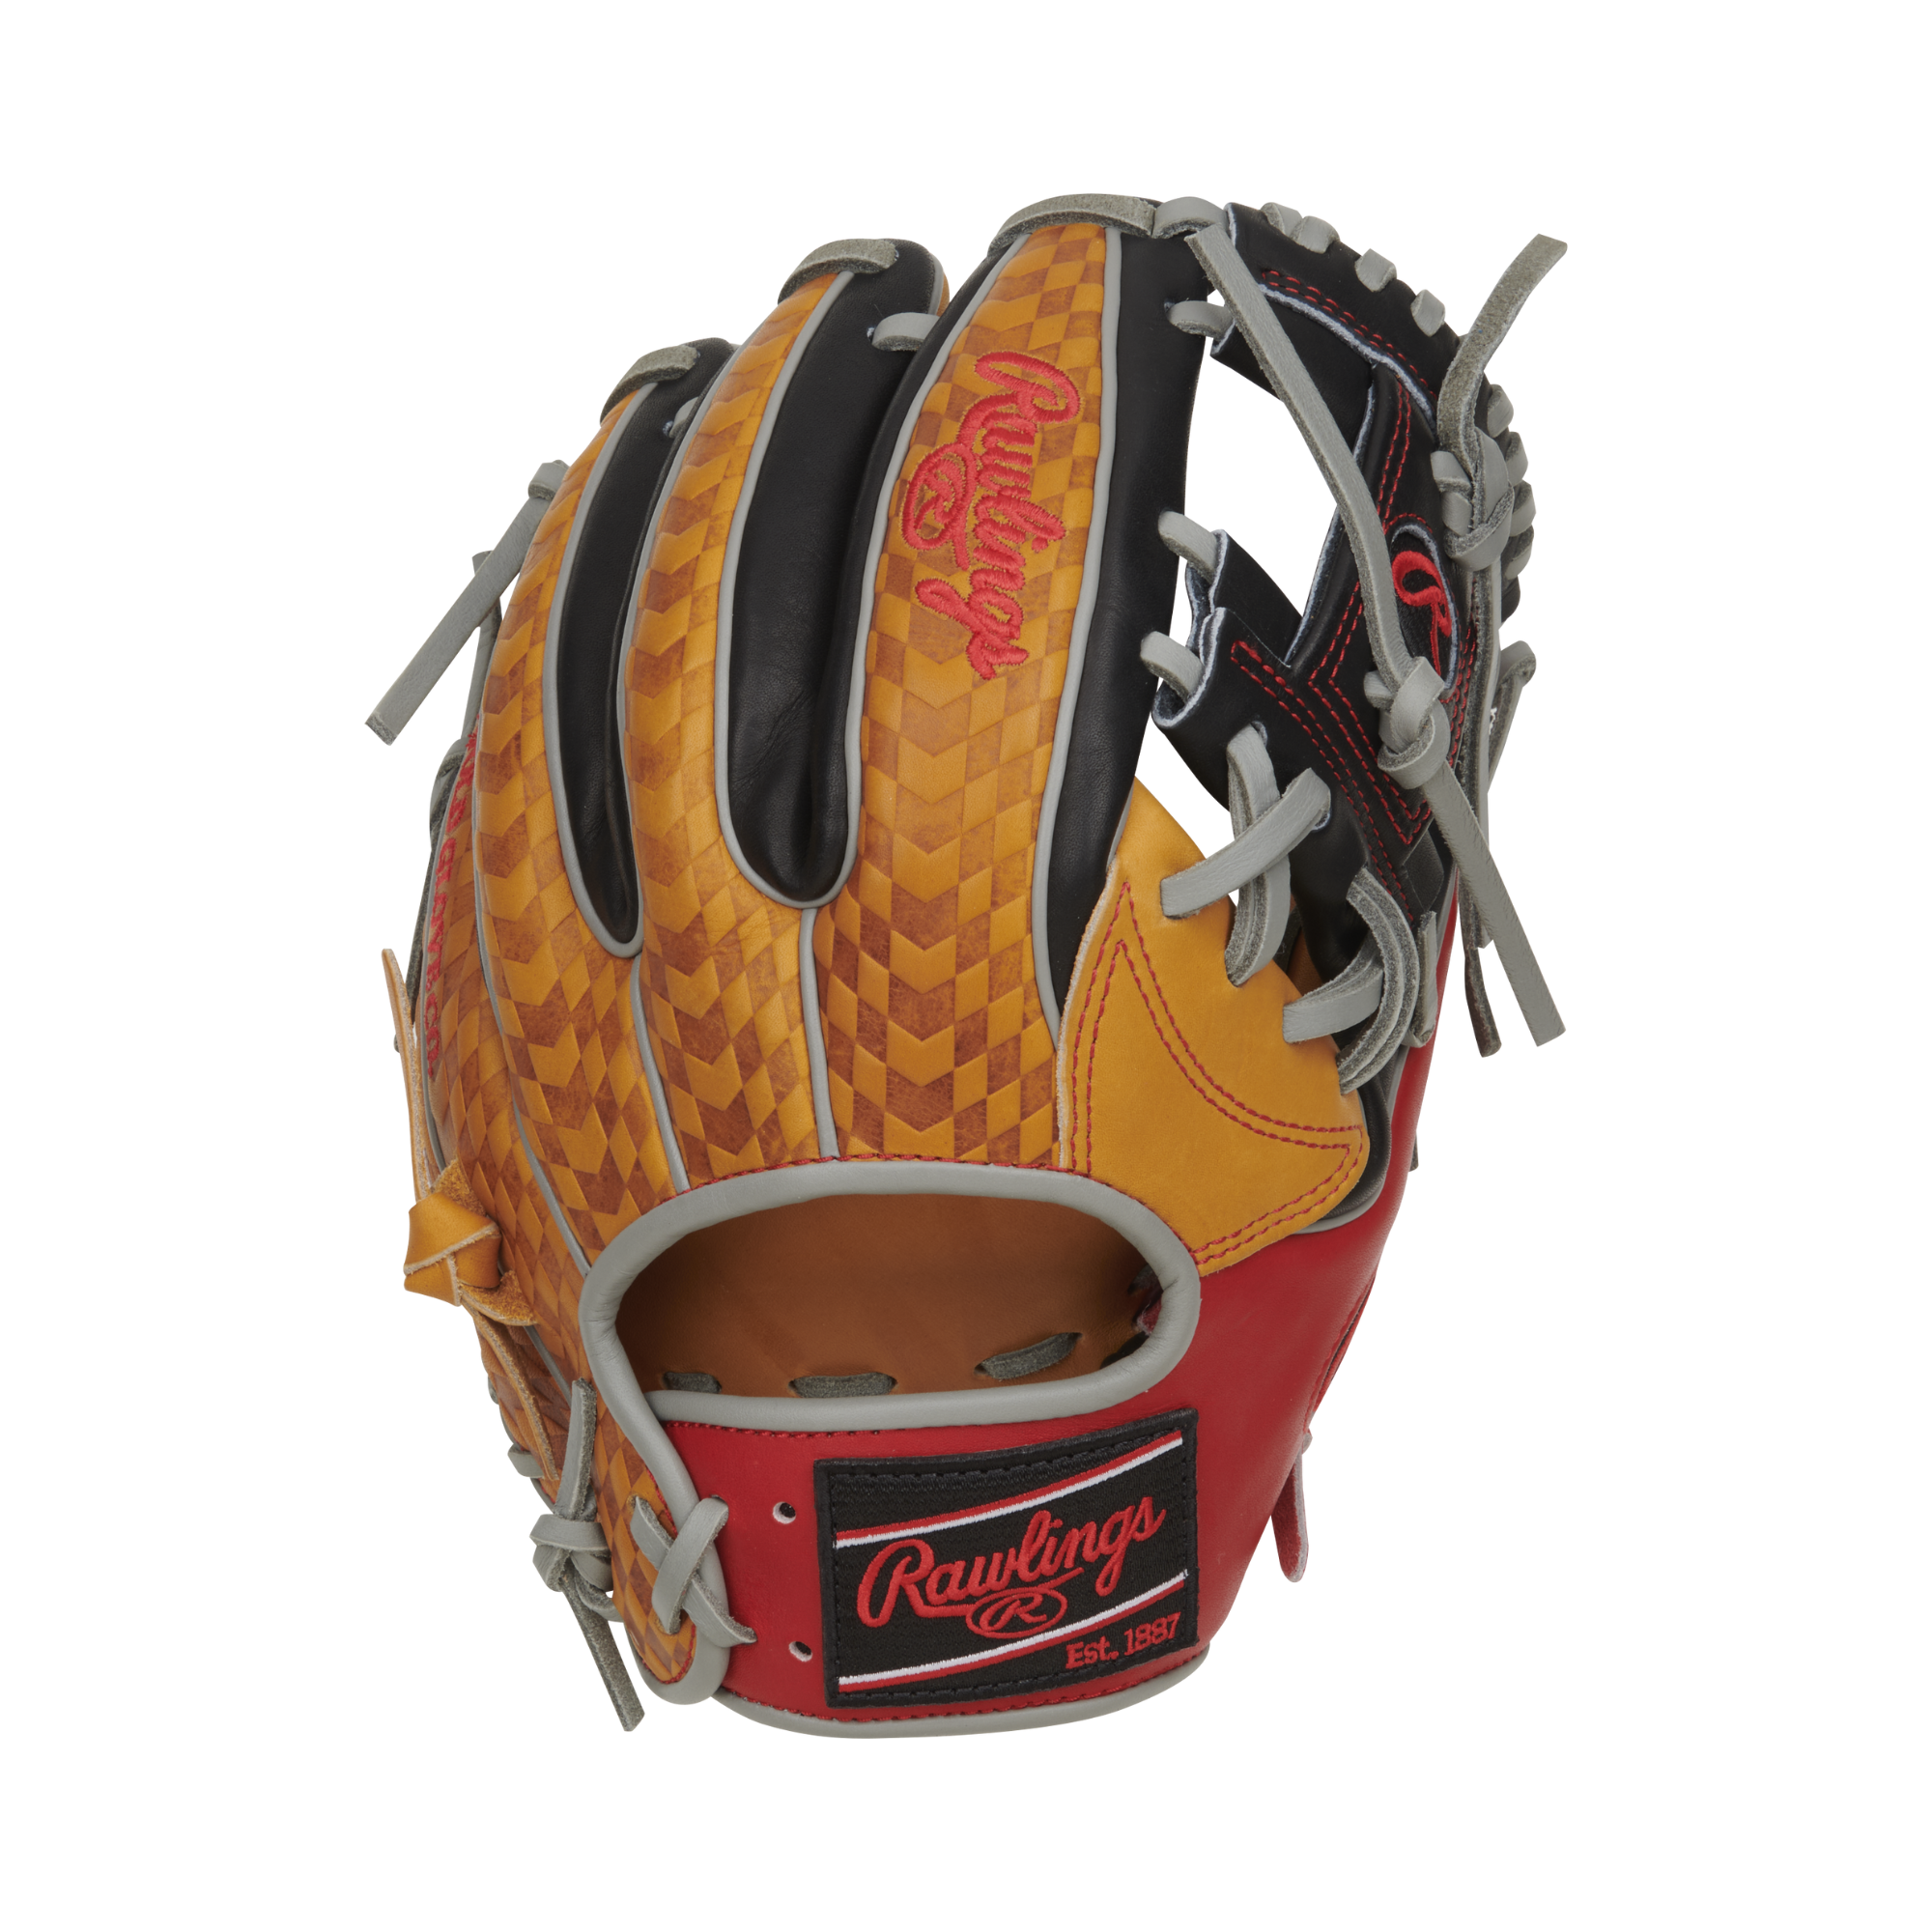 Rawlings Heart Of The Hide - Color Sync 8.0 Limited Edition Baseball Glove PRO934-2TS 11.5" RHT